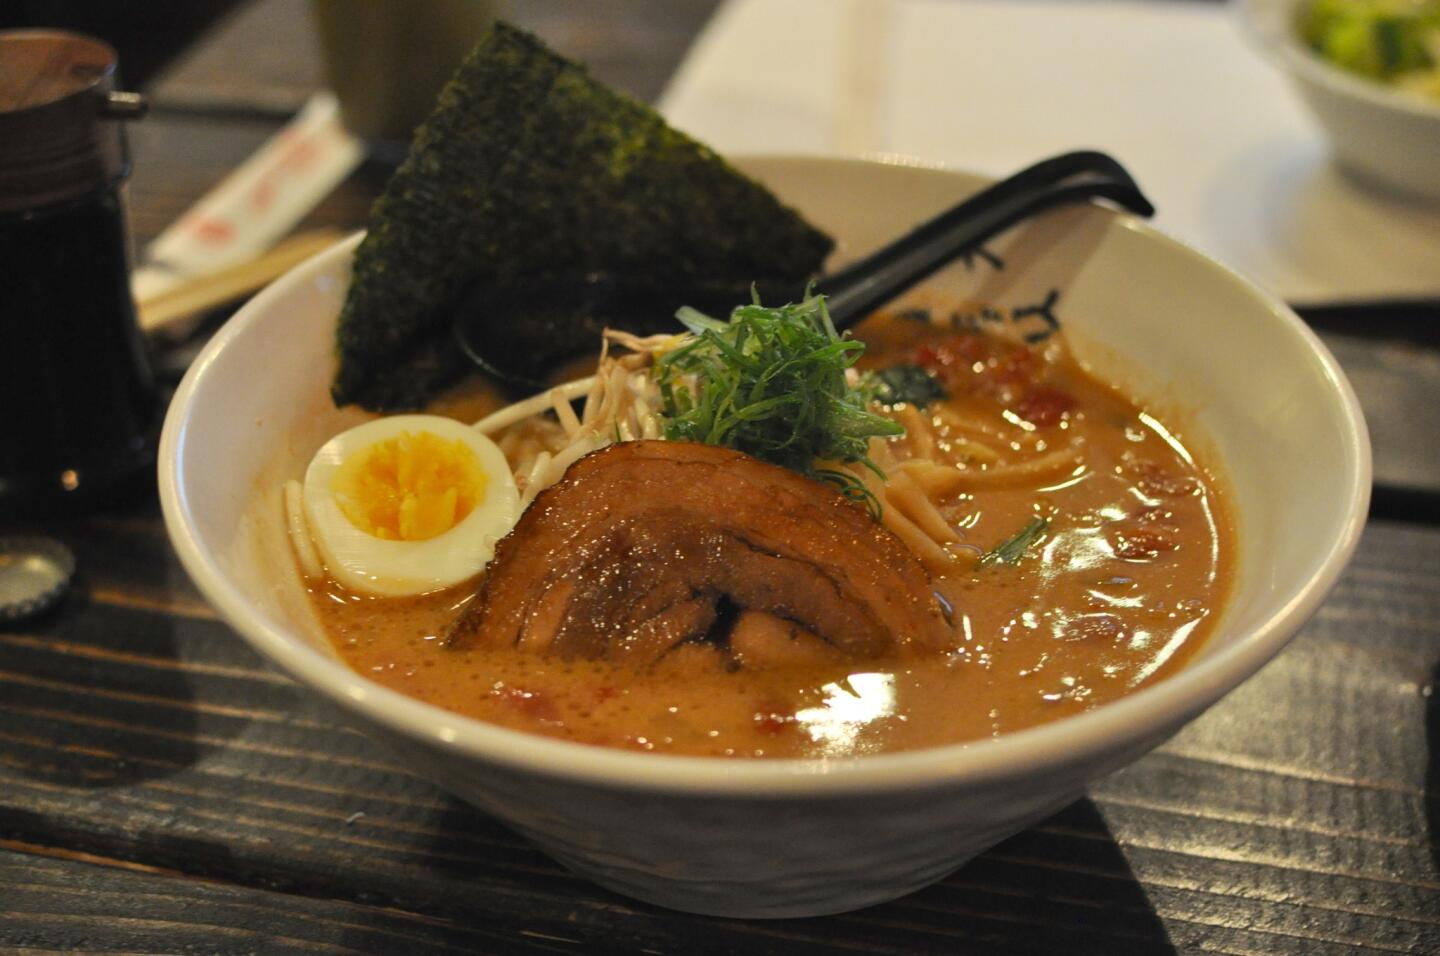 Fat and spice and everything nice in this spicy tonkotsu.